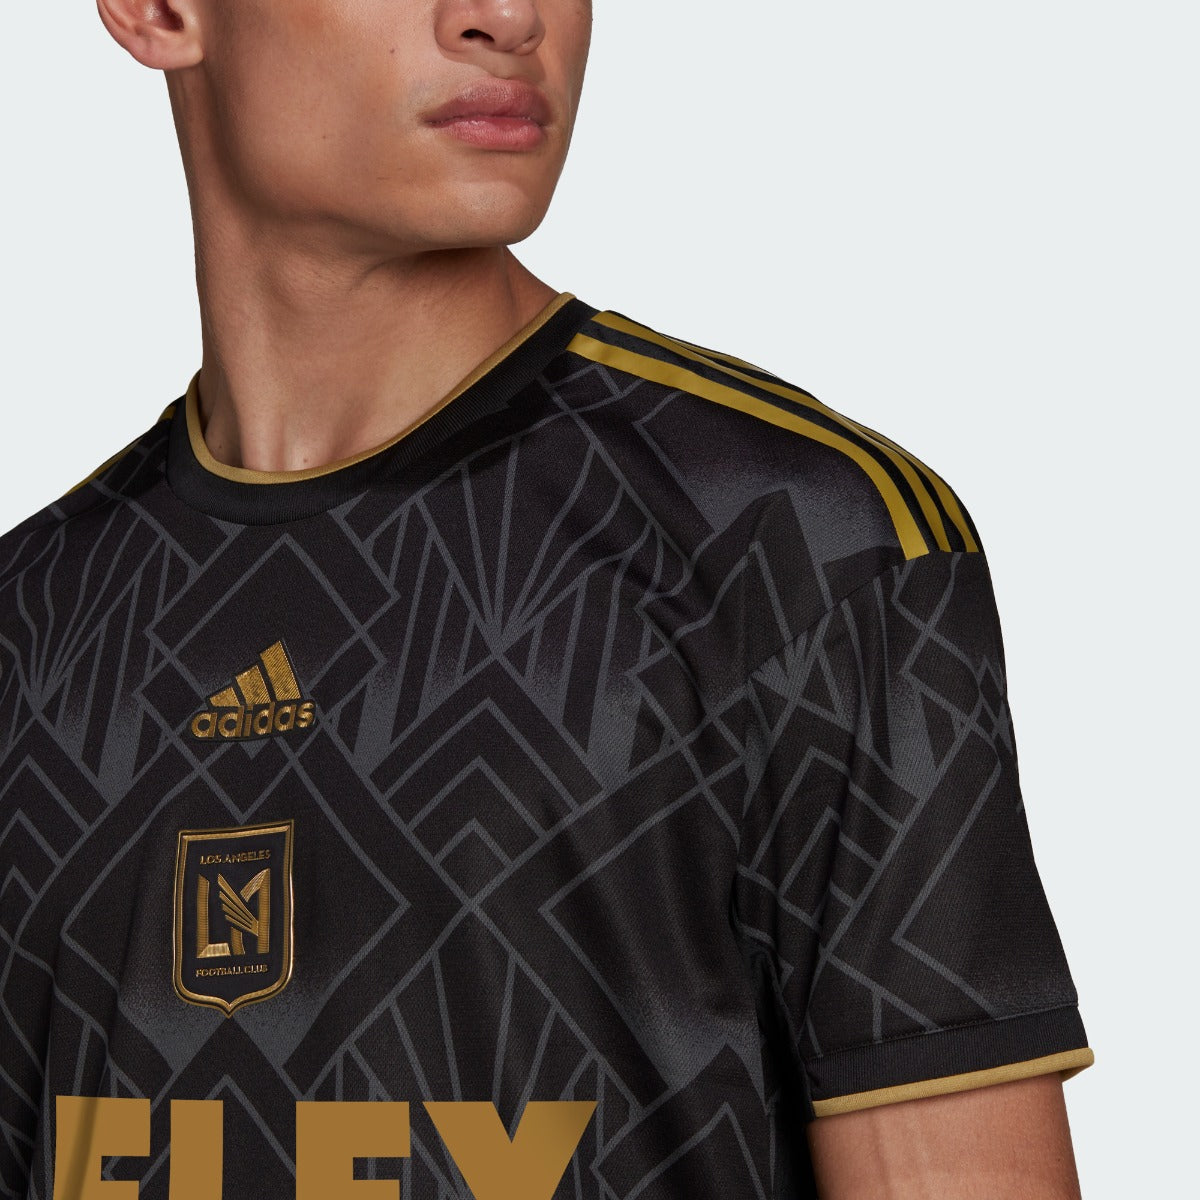 22/23 LAFC Los Angeles Home Jersey